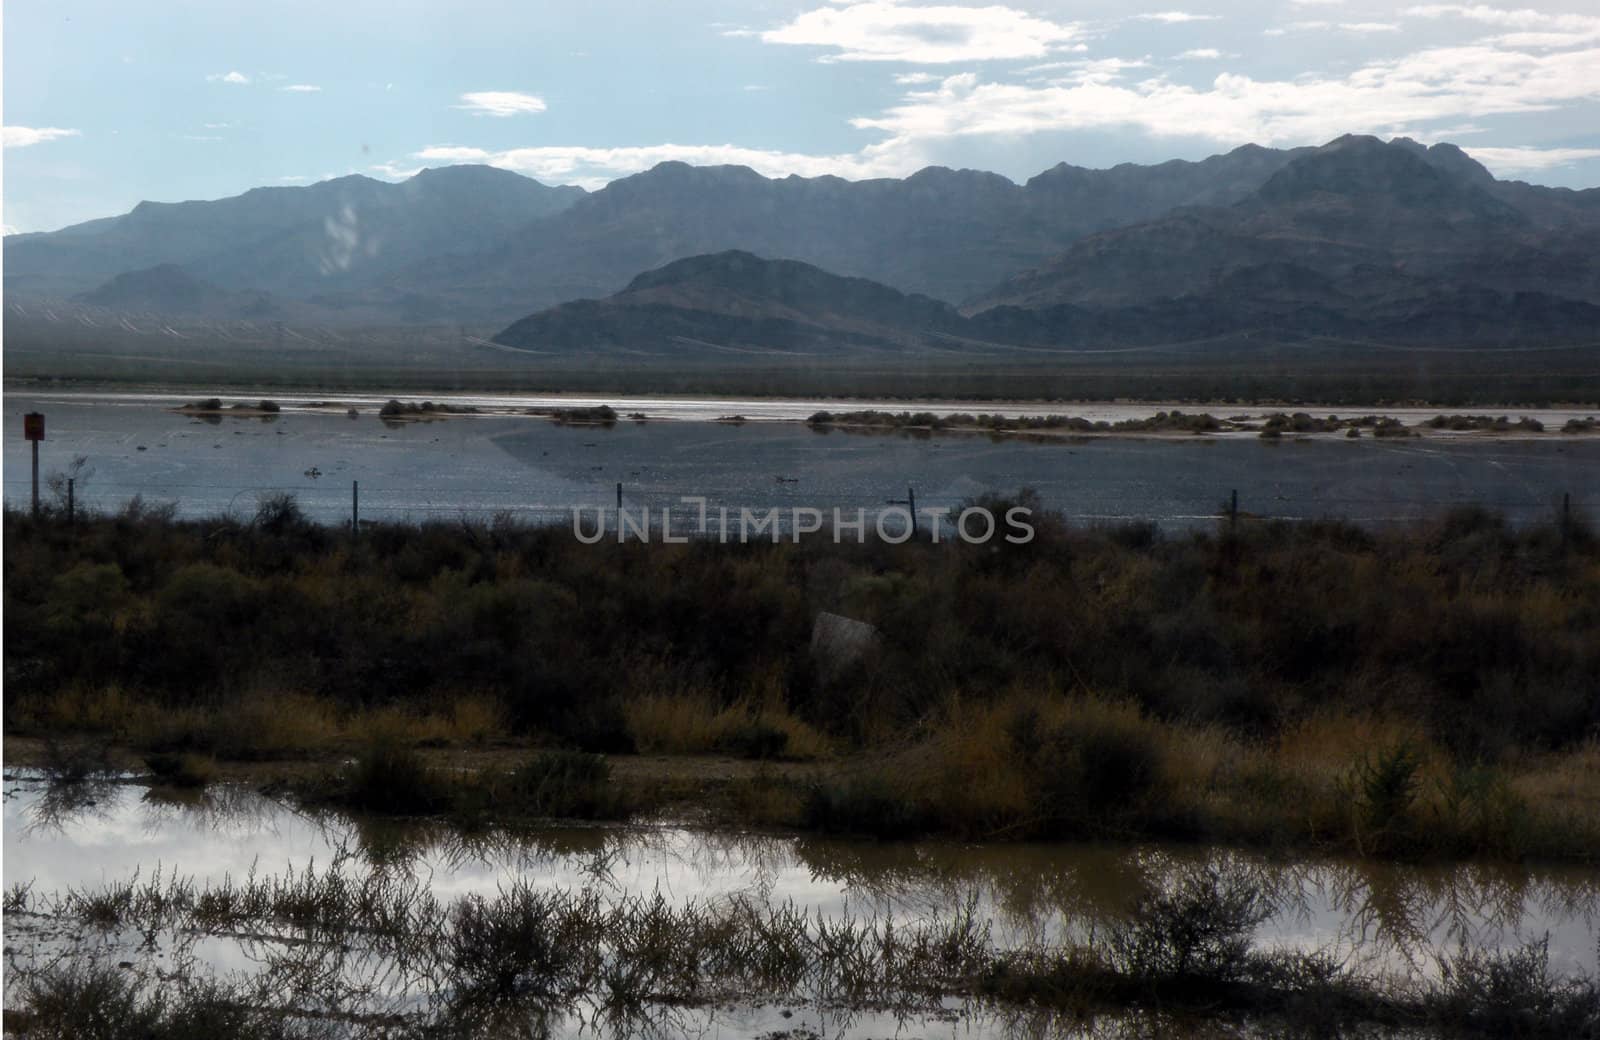 fresh rainfall in the dessert, reflecting the mountains in the background